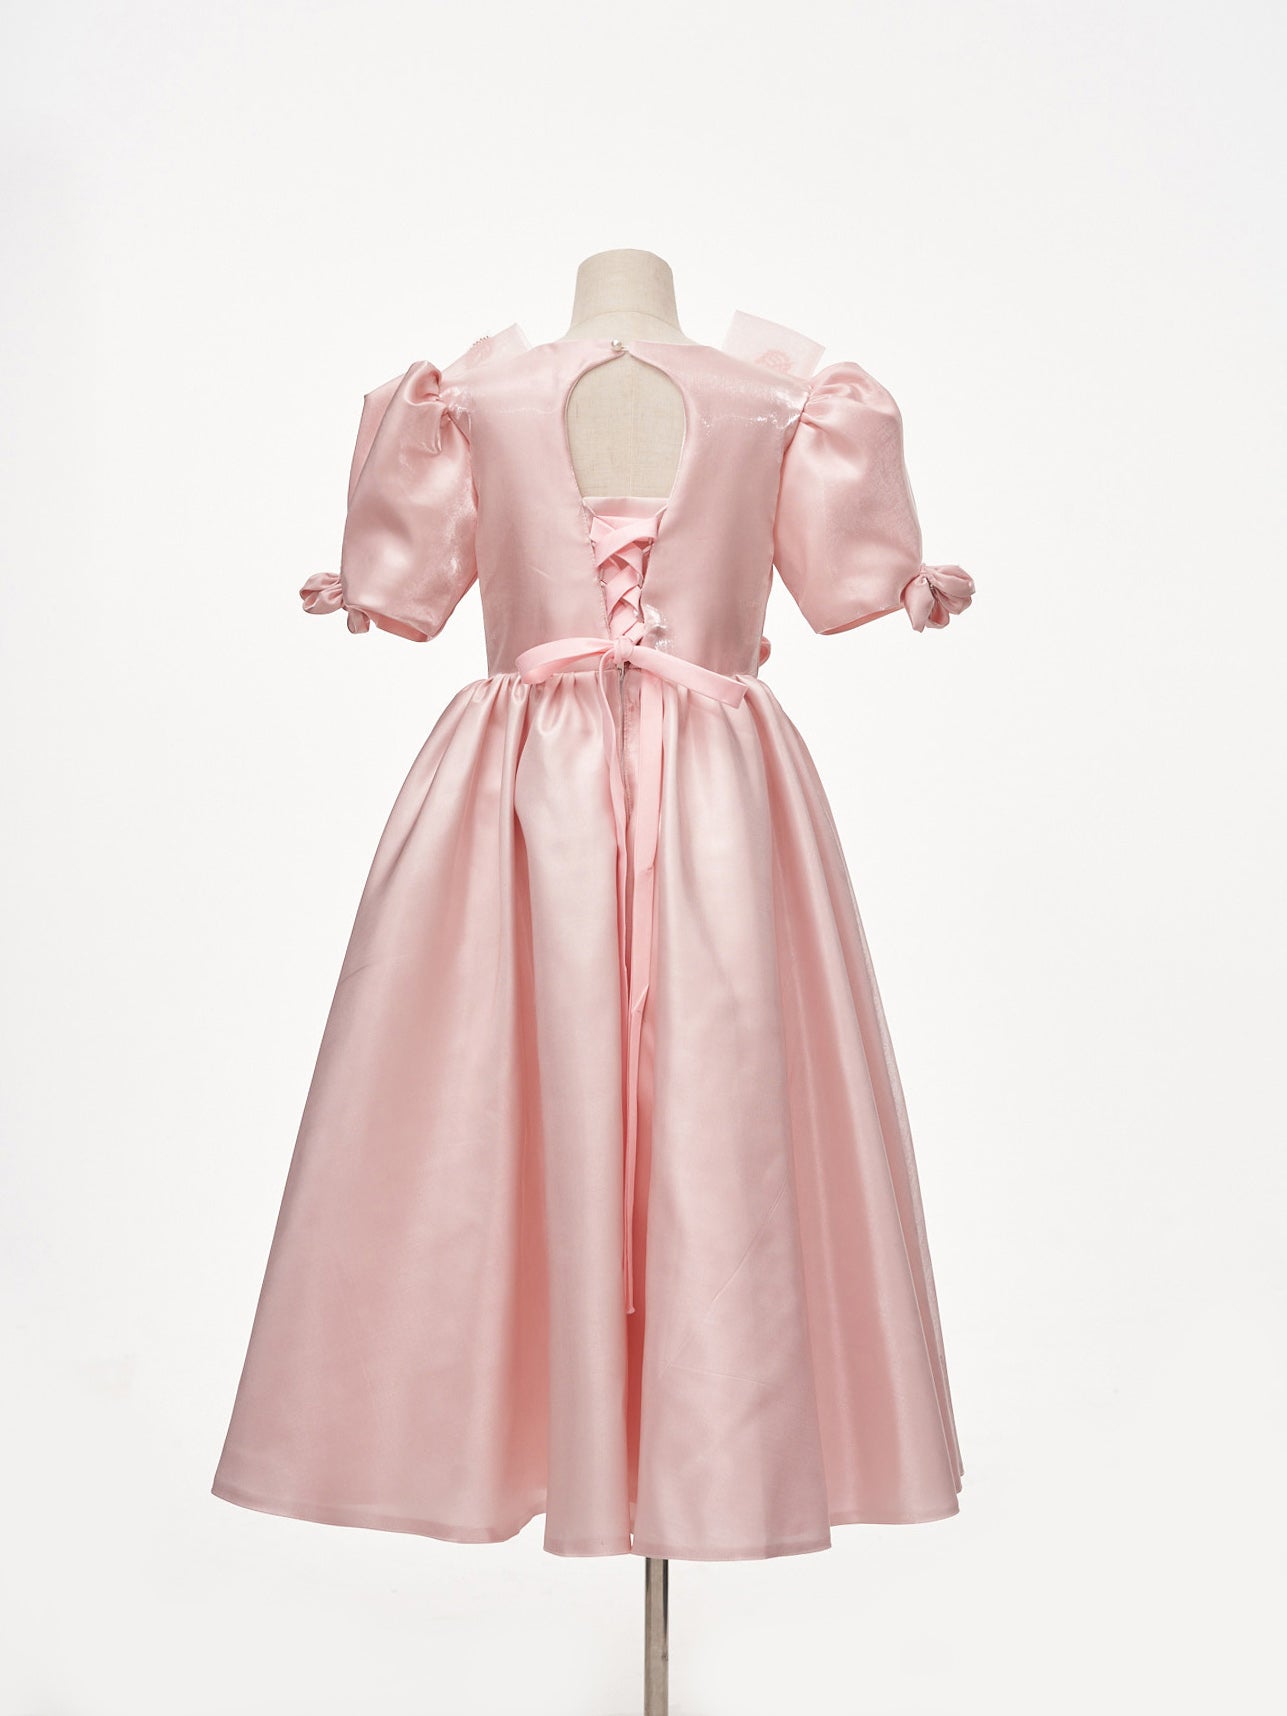 Kate Silk Organza Embroidery Princess Kids Dress for Photography